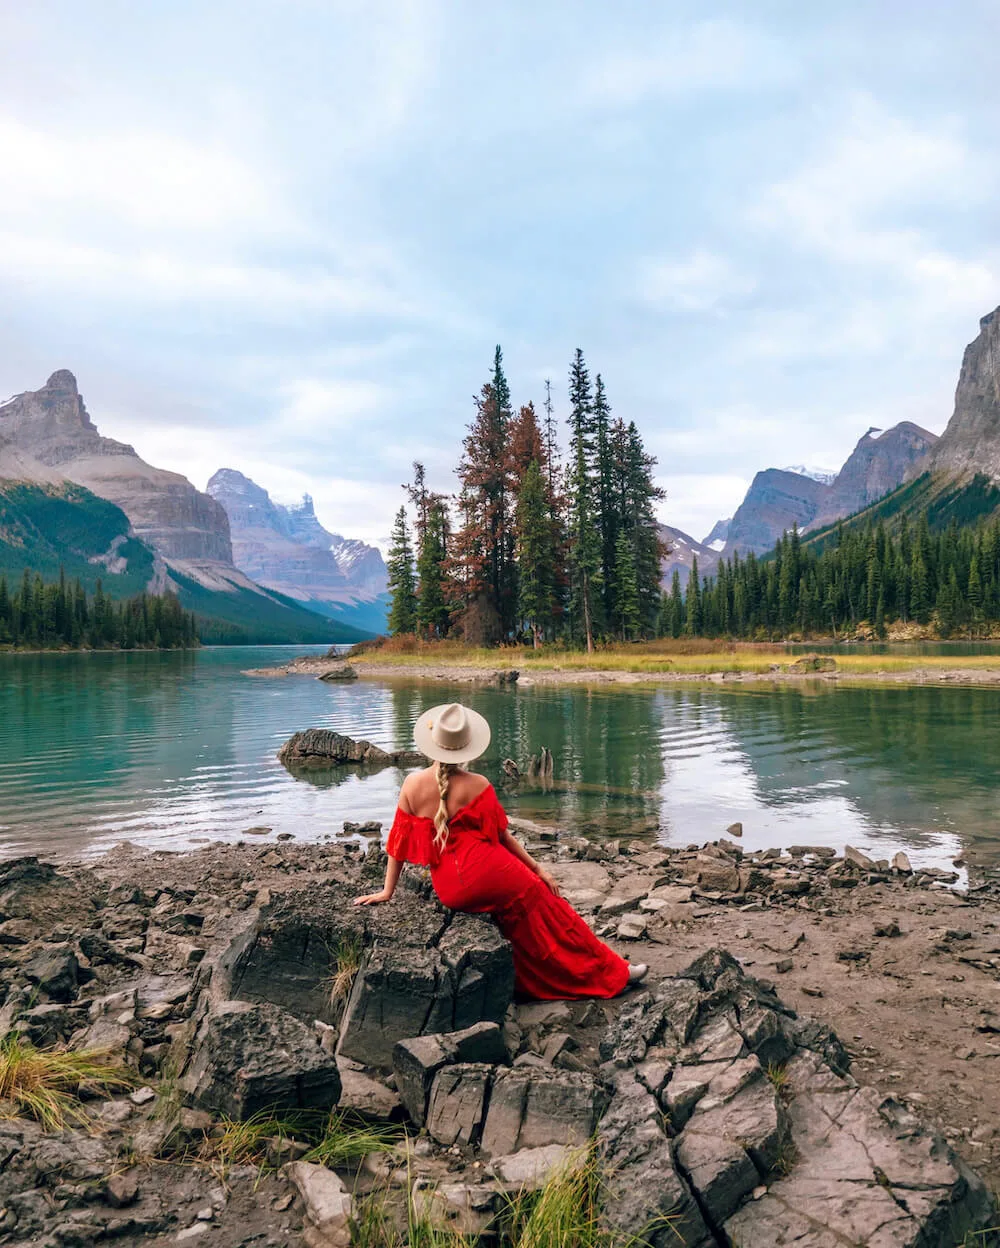 Planning a trip to Jasper National Park soon? Here's a local's guide to some of the best things to do in Jasper. From hikes and trails to adventure sports, family friendly excursions, dining experiences and more. You won't want to miss this guide of the best things to do and places to see in Jasper. Pictured here: Spirit Island